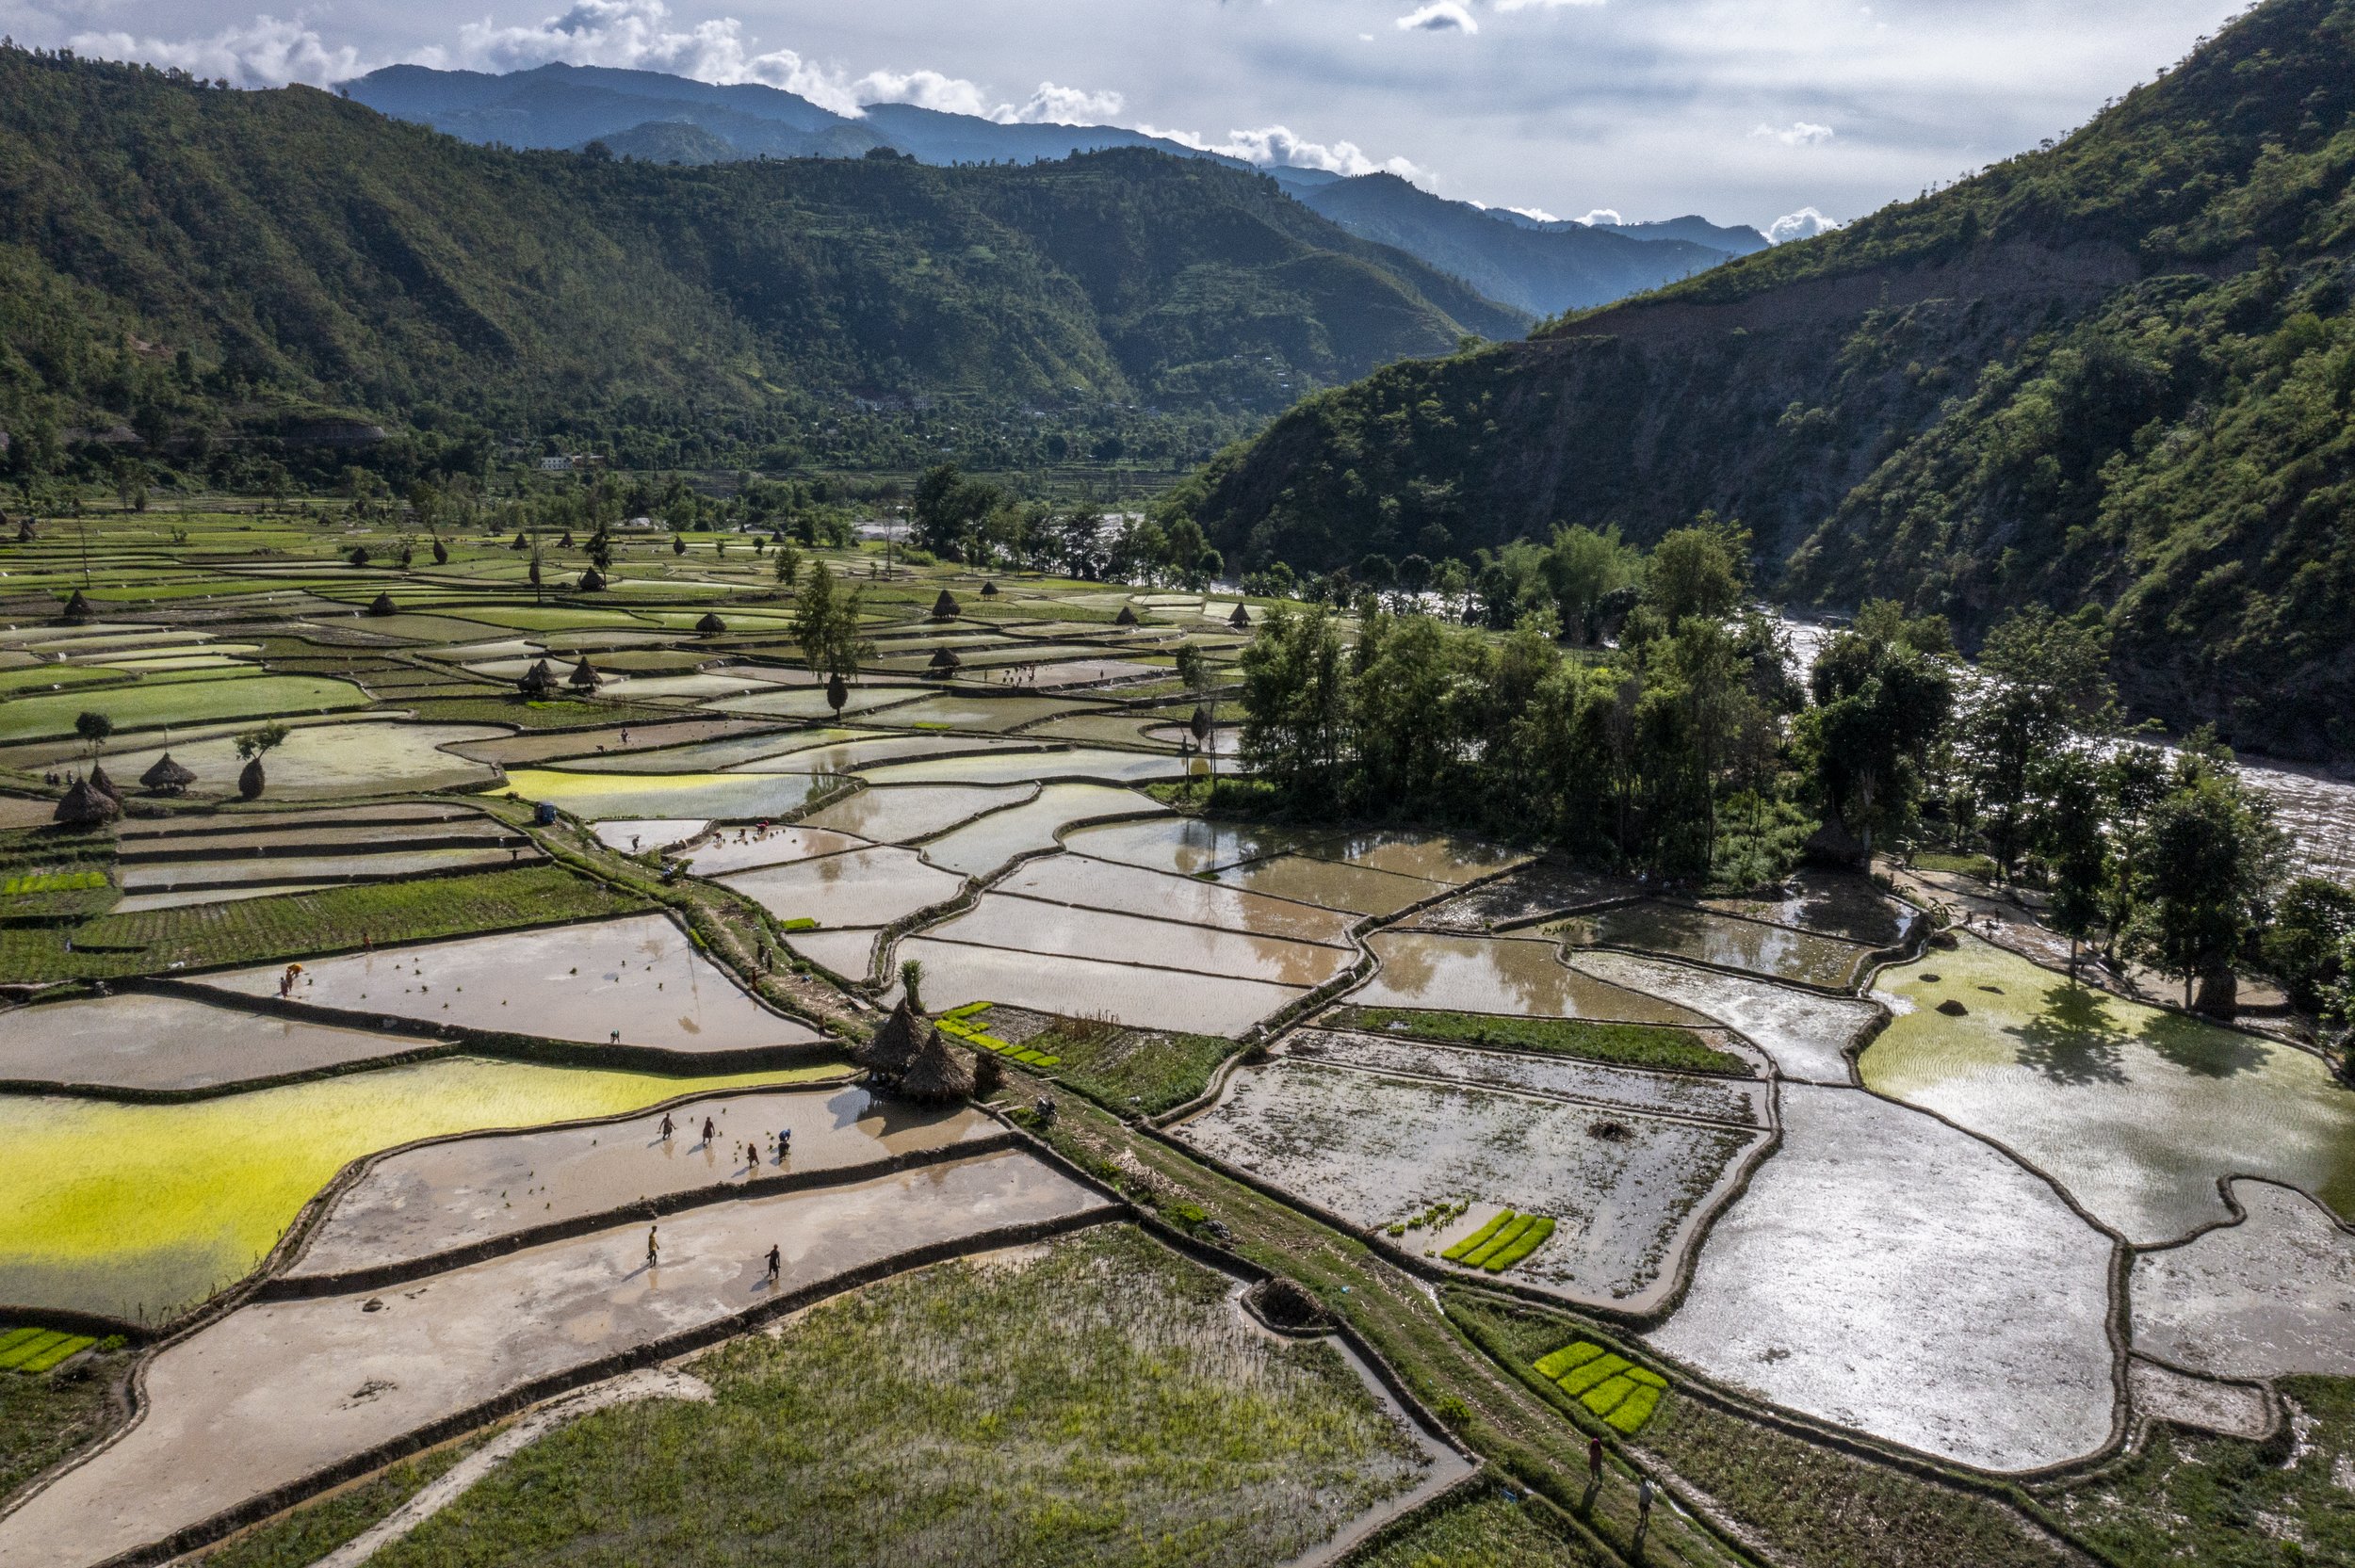  Aerial view of rice fields in the hills of Nepal, on July 2, 2022. 